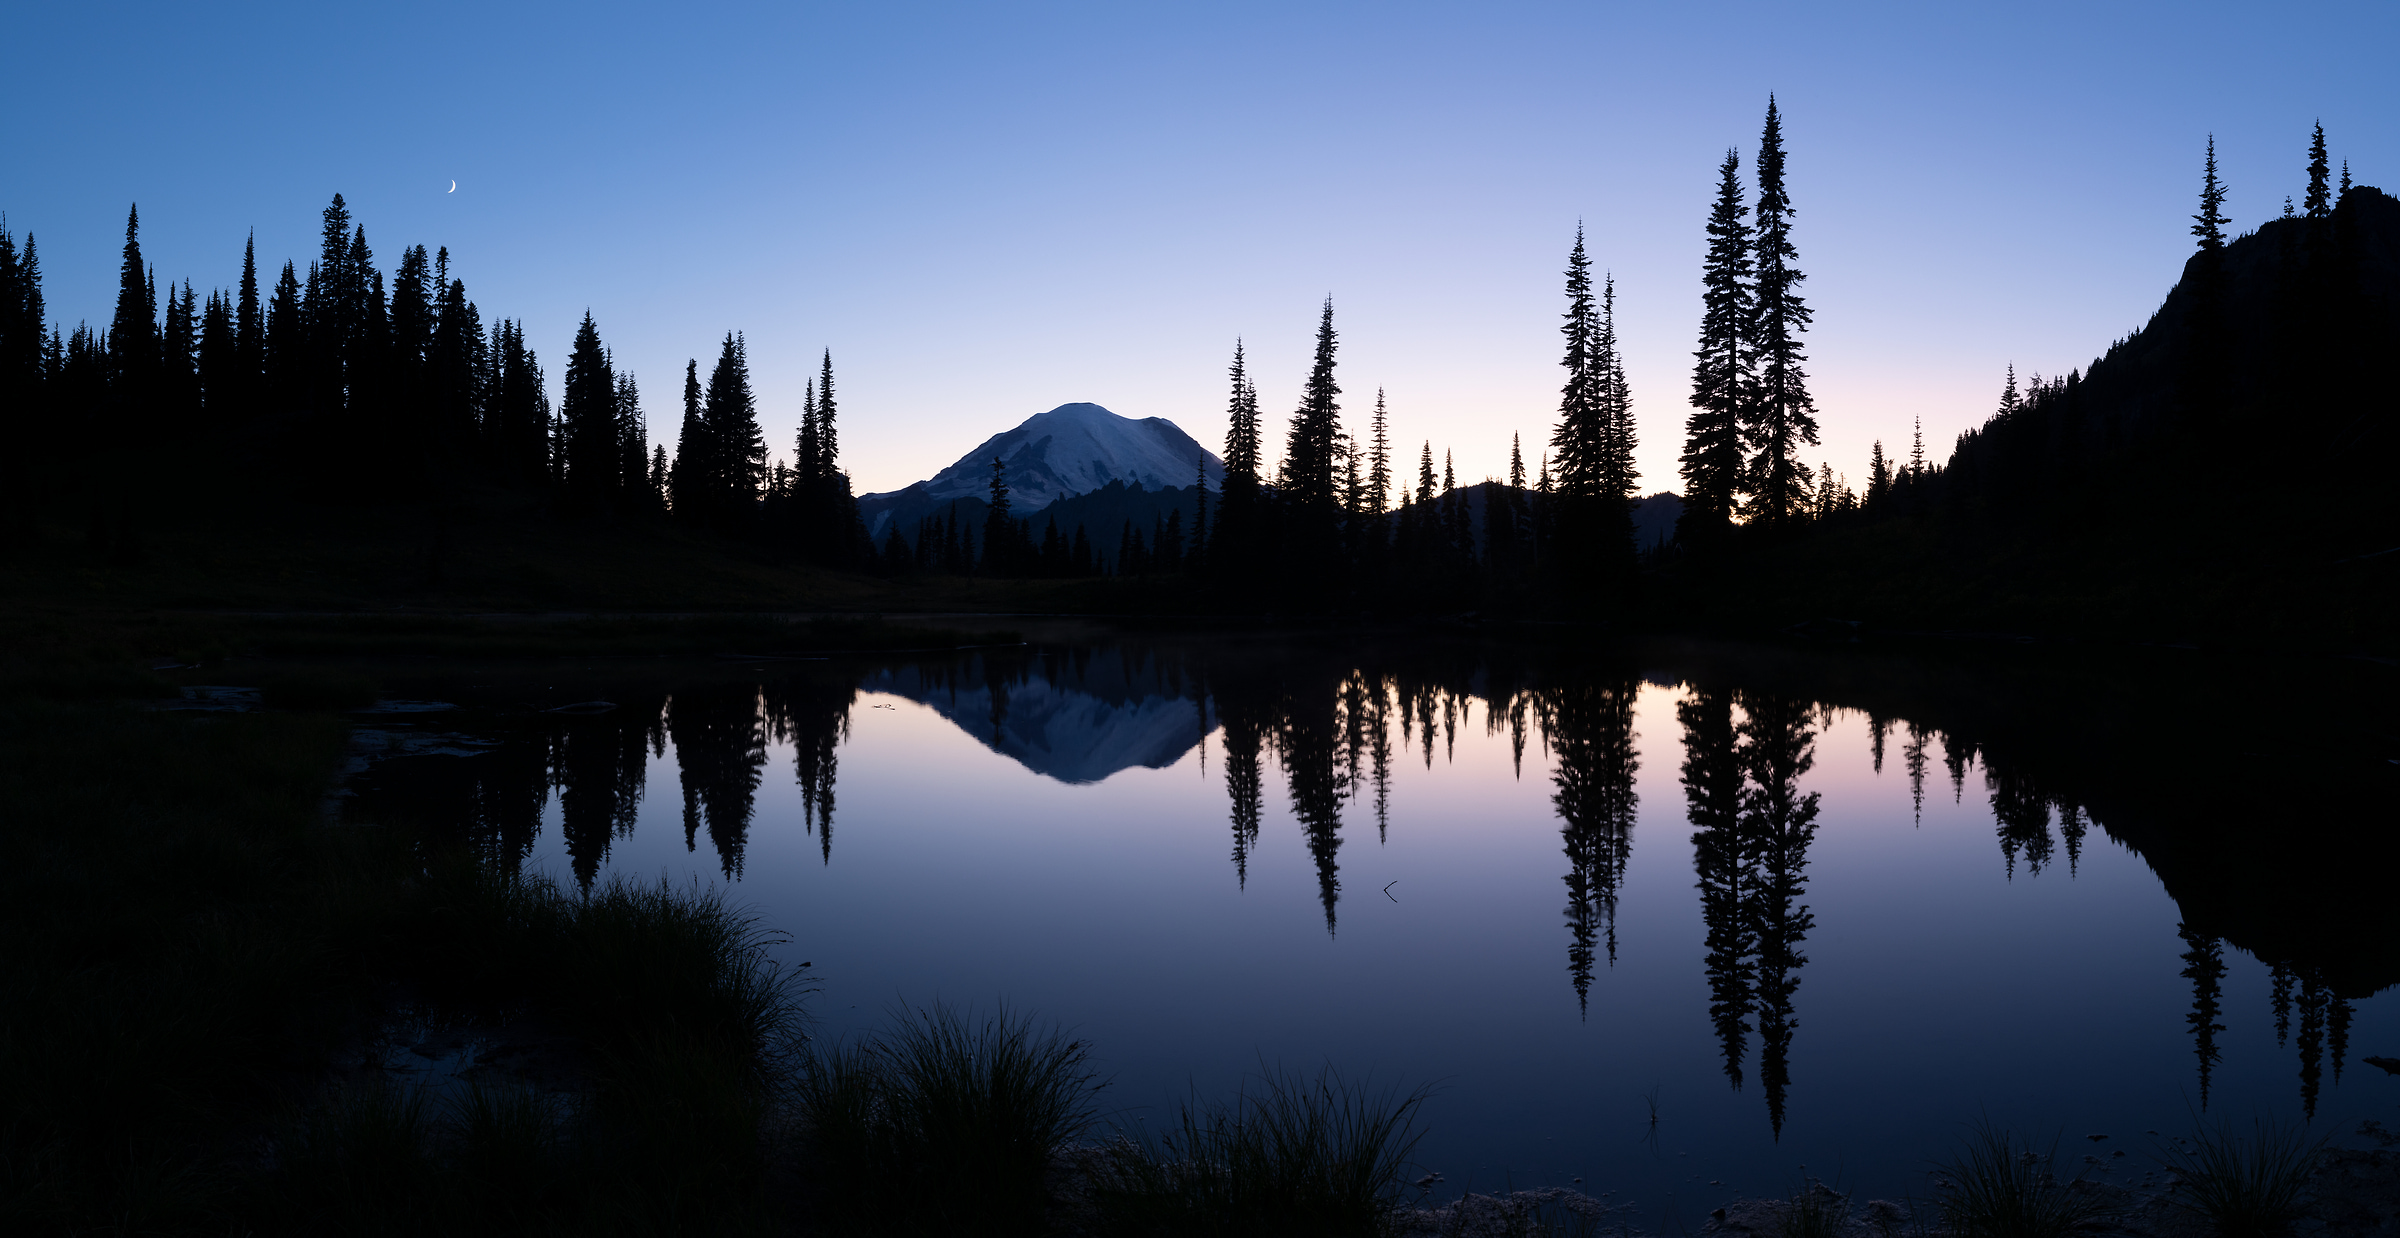 162 megapixels! A very high resolution, large-format VAST photo print of a lake at twilight with evergreen trees and Mt. Rainier being reflected; photograph created by Greg Probst in Mt. Rainier National Park, Washington.